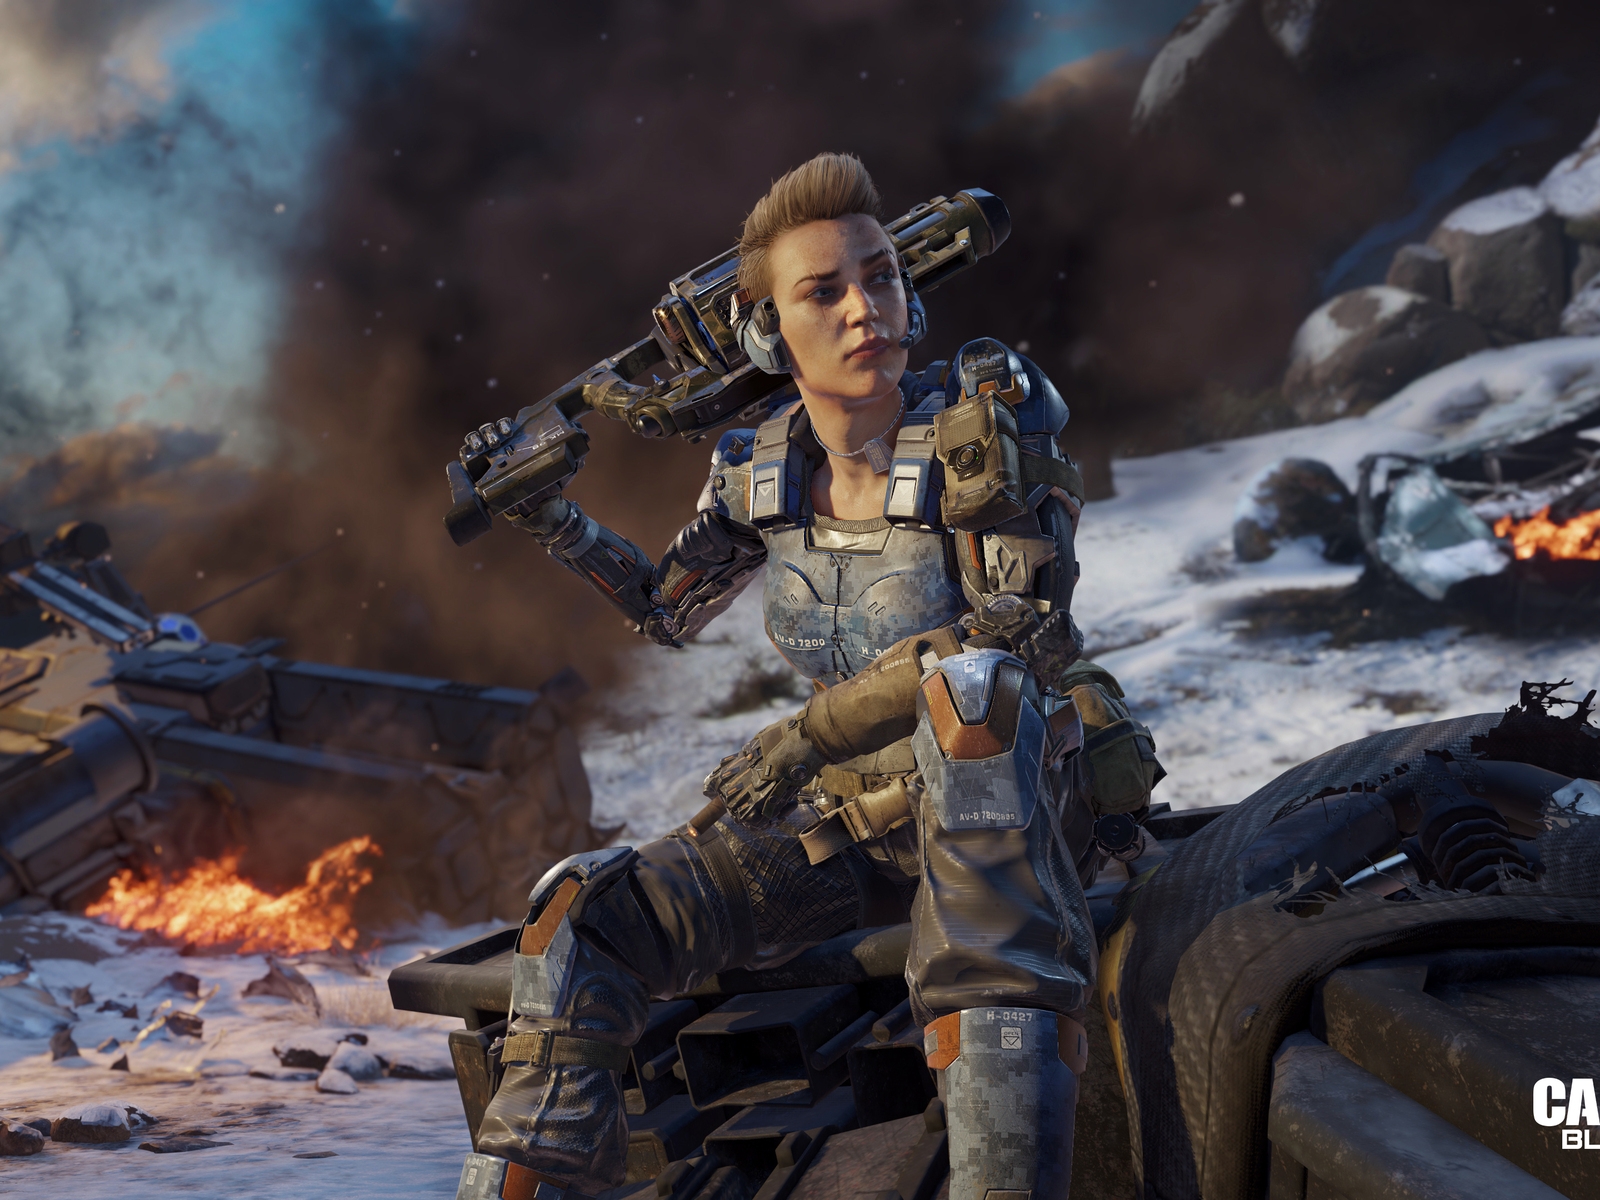 Call of Duty Black Ops 3 Girl for 1600 x 1200 resolution